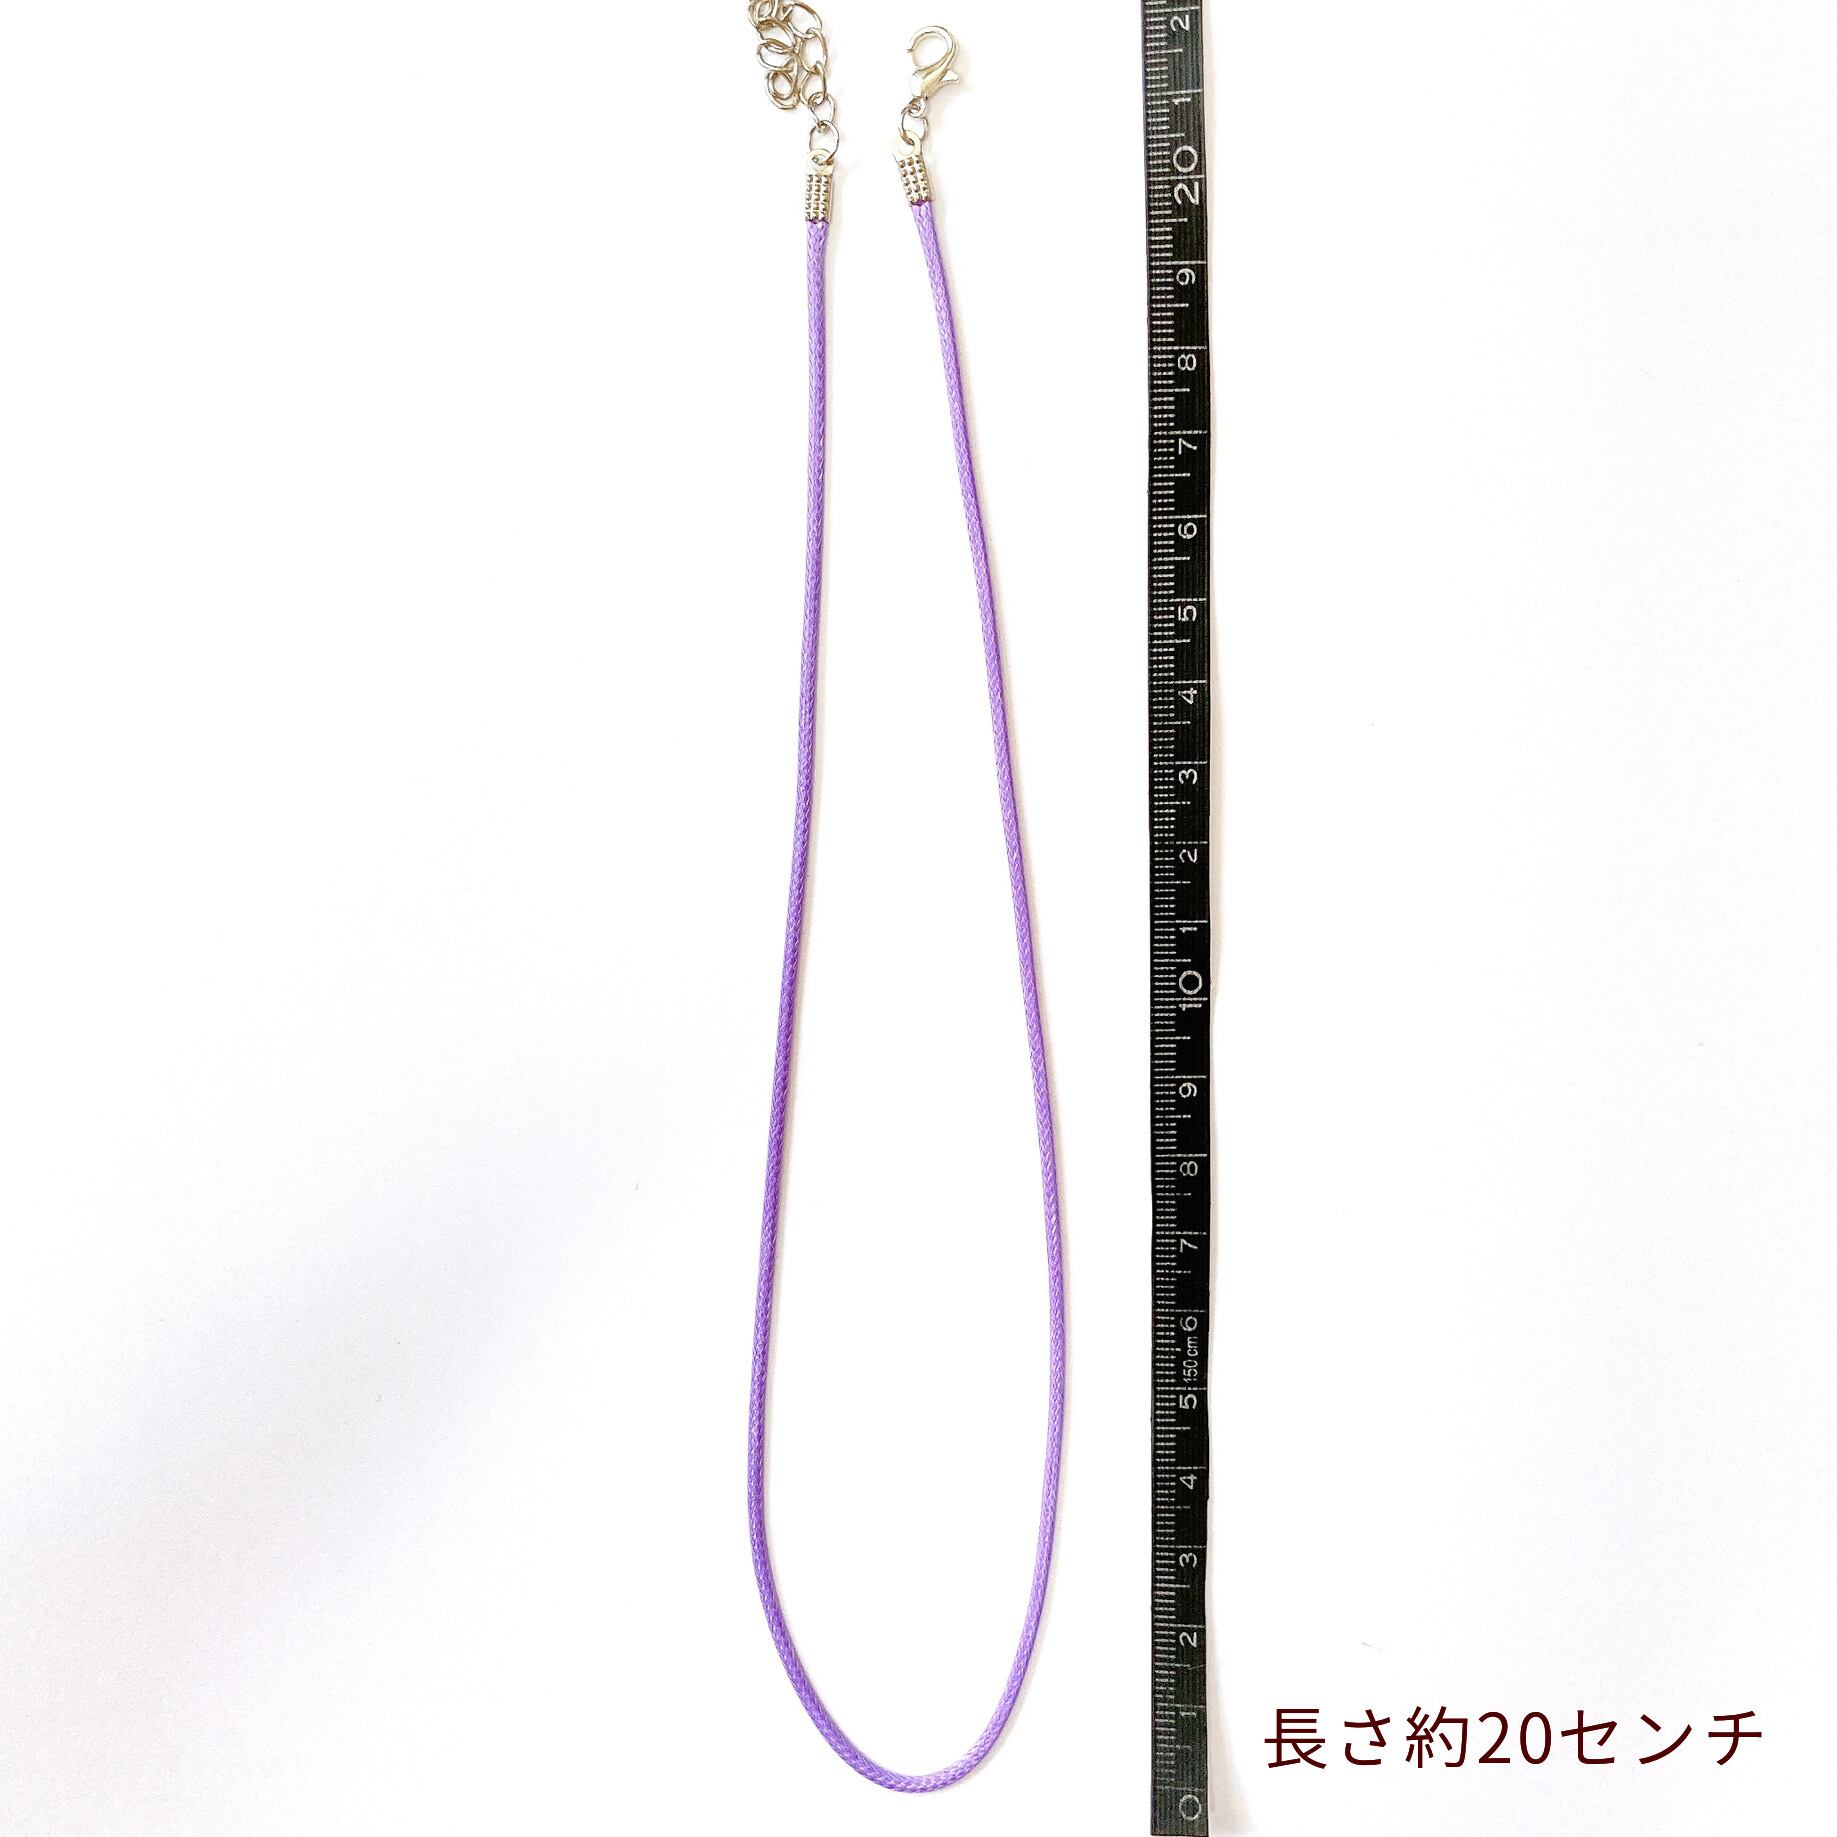 little   necklace  （ c - 5 ）  キッズネックレス